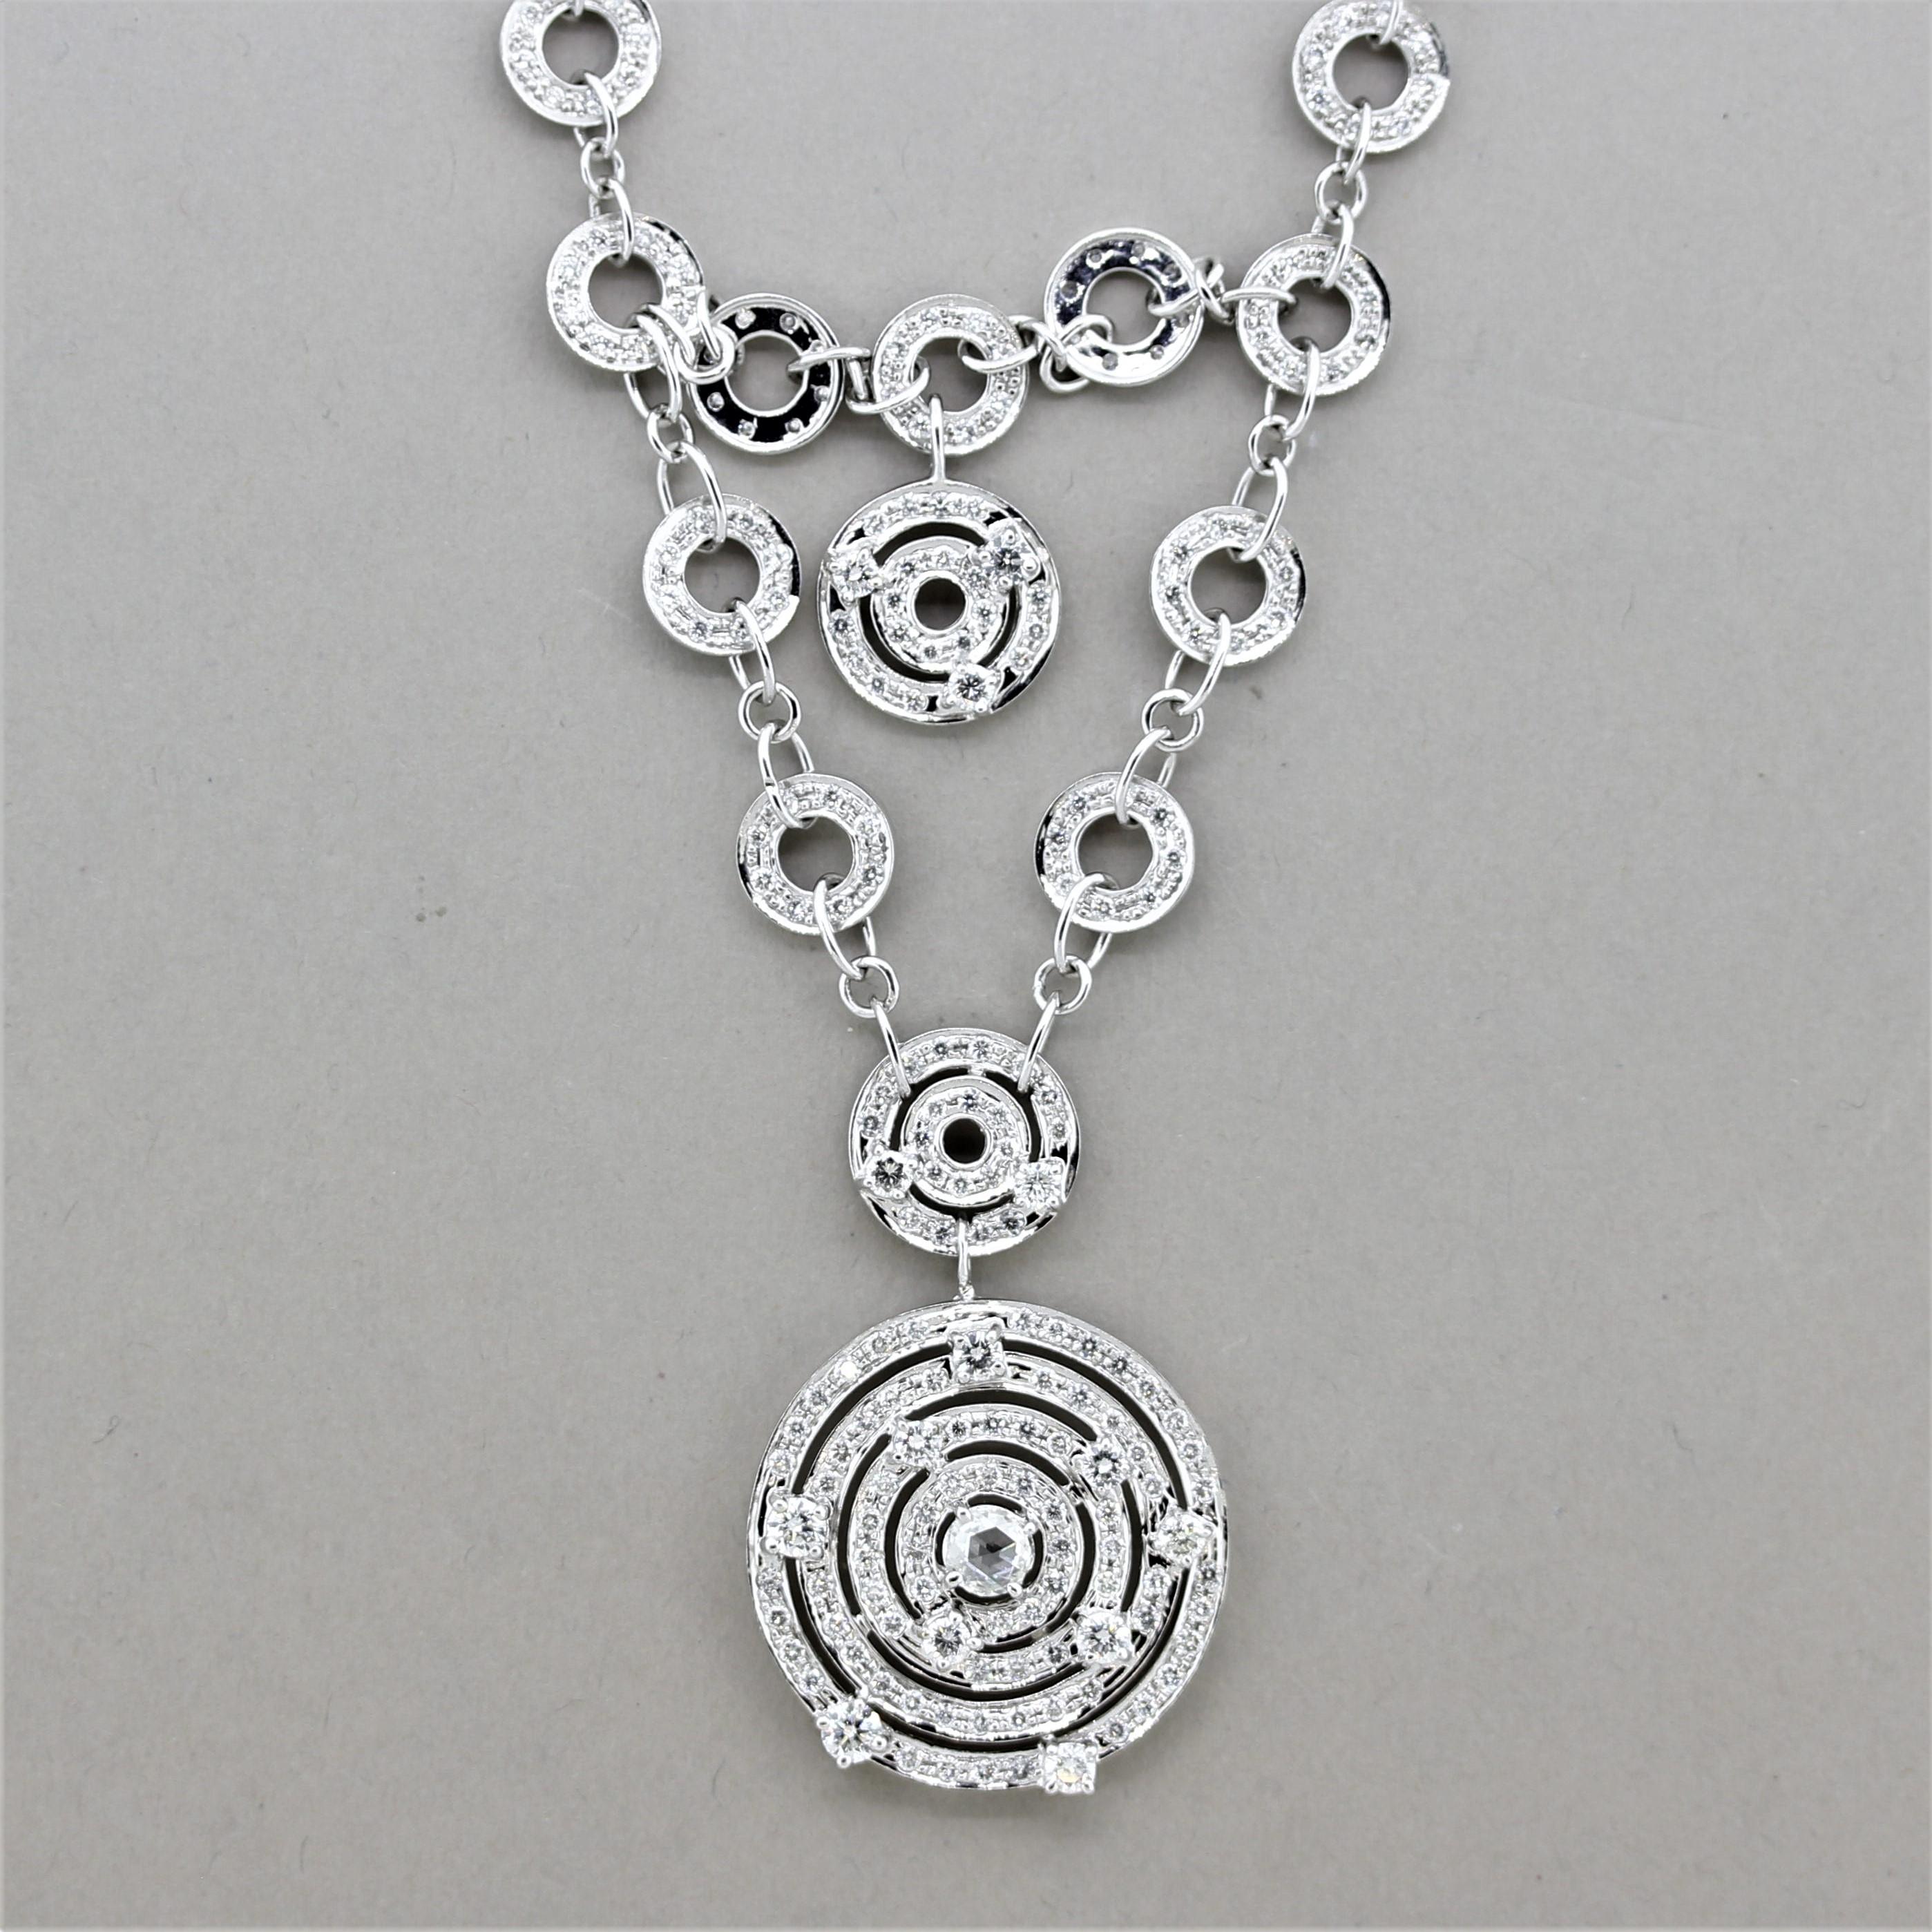 A unique and stylish necklace featuring 3.76 carats of round brilliant-cut diamonds along with one larger rose-cut diamond. They are set around the various circles giving the piece a fun open style. Made in 18k white gold and ready to be